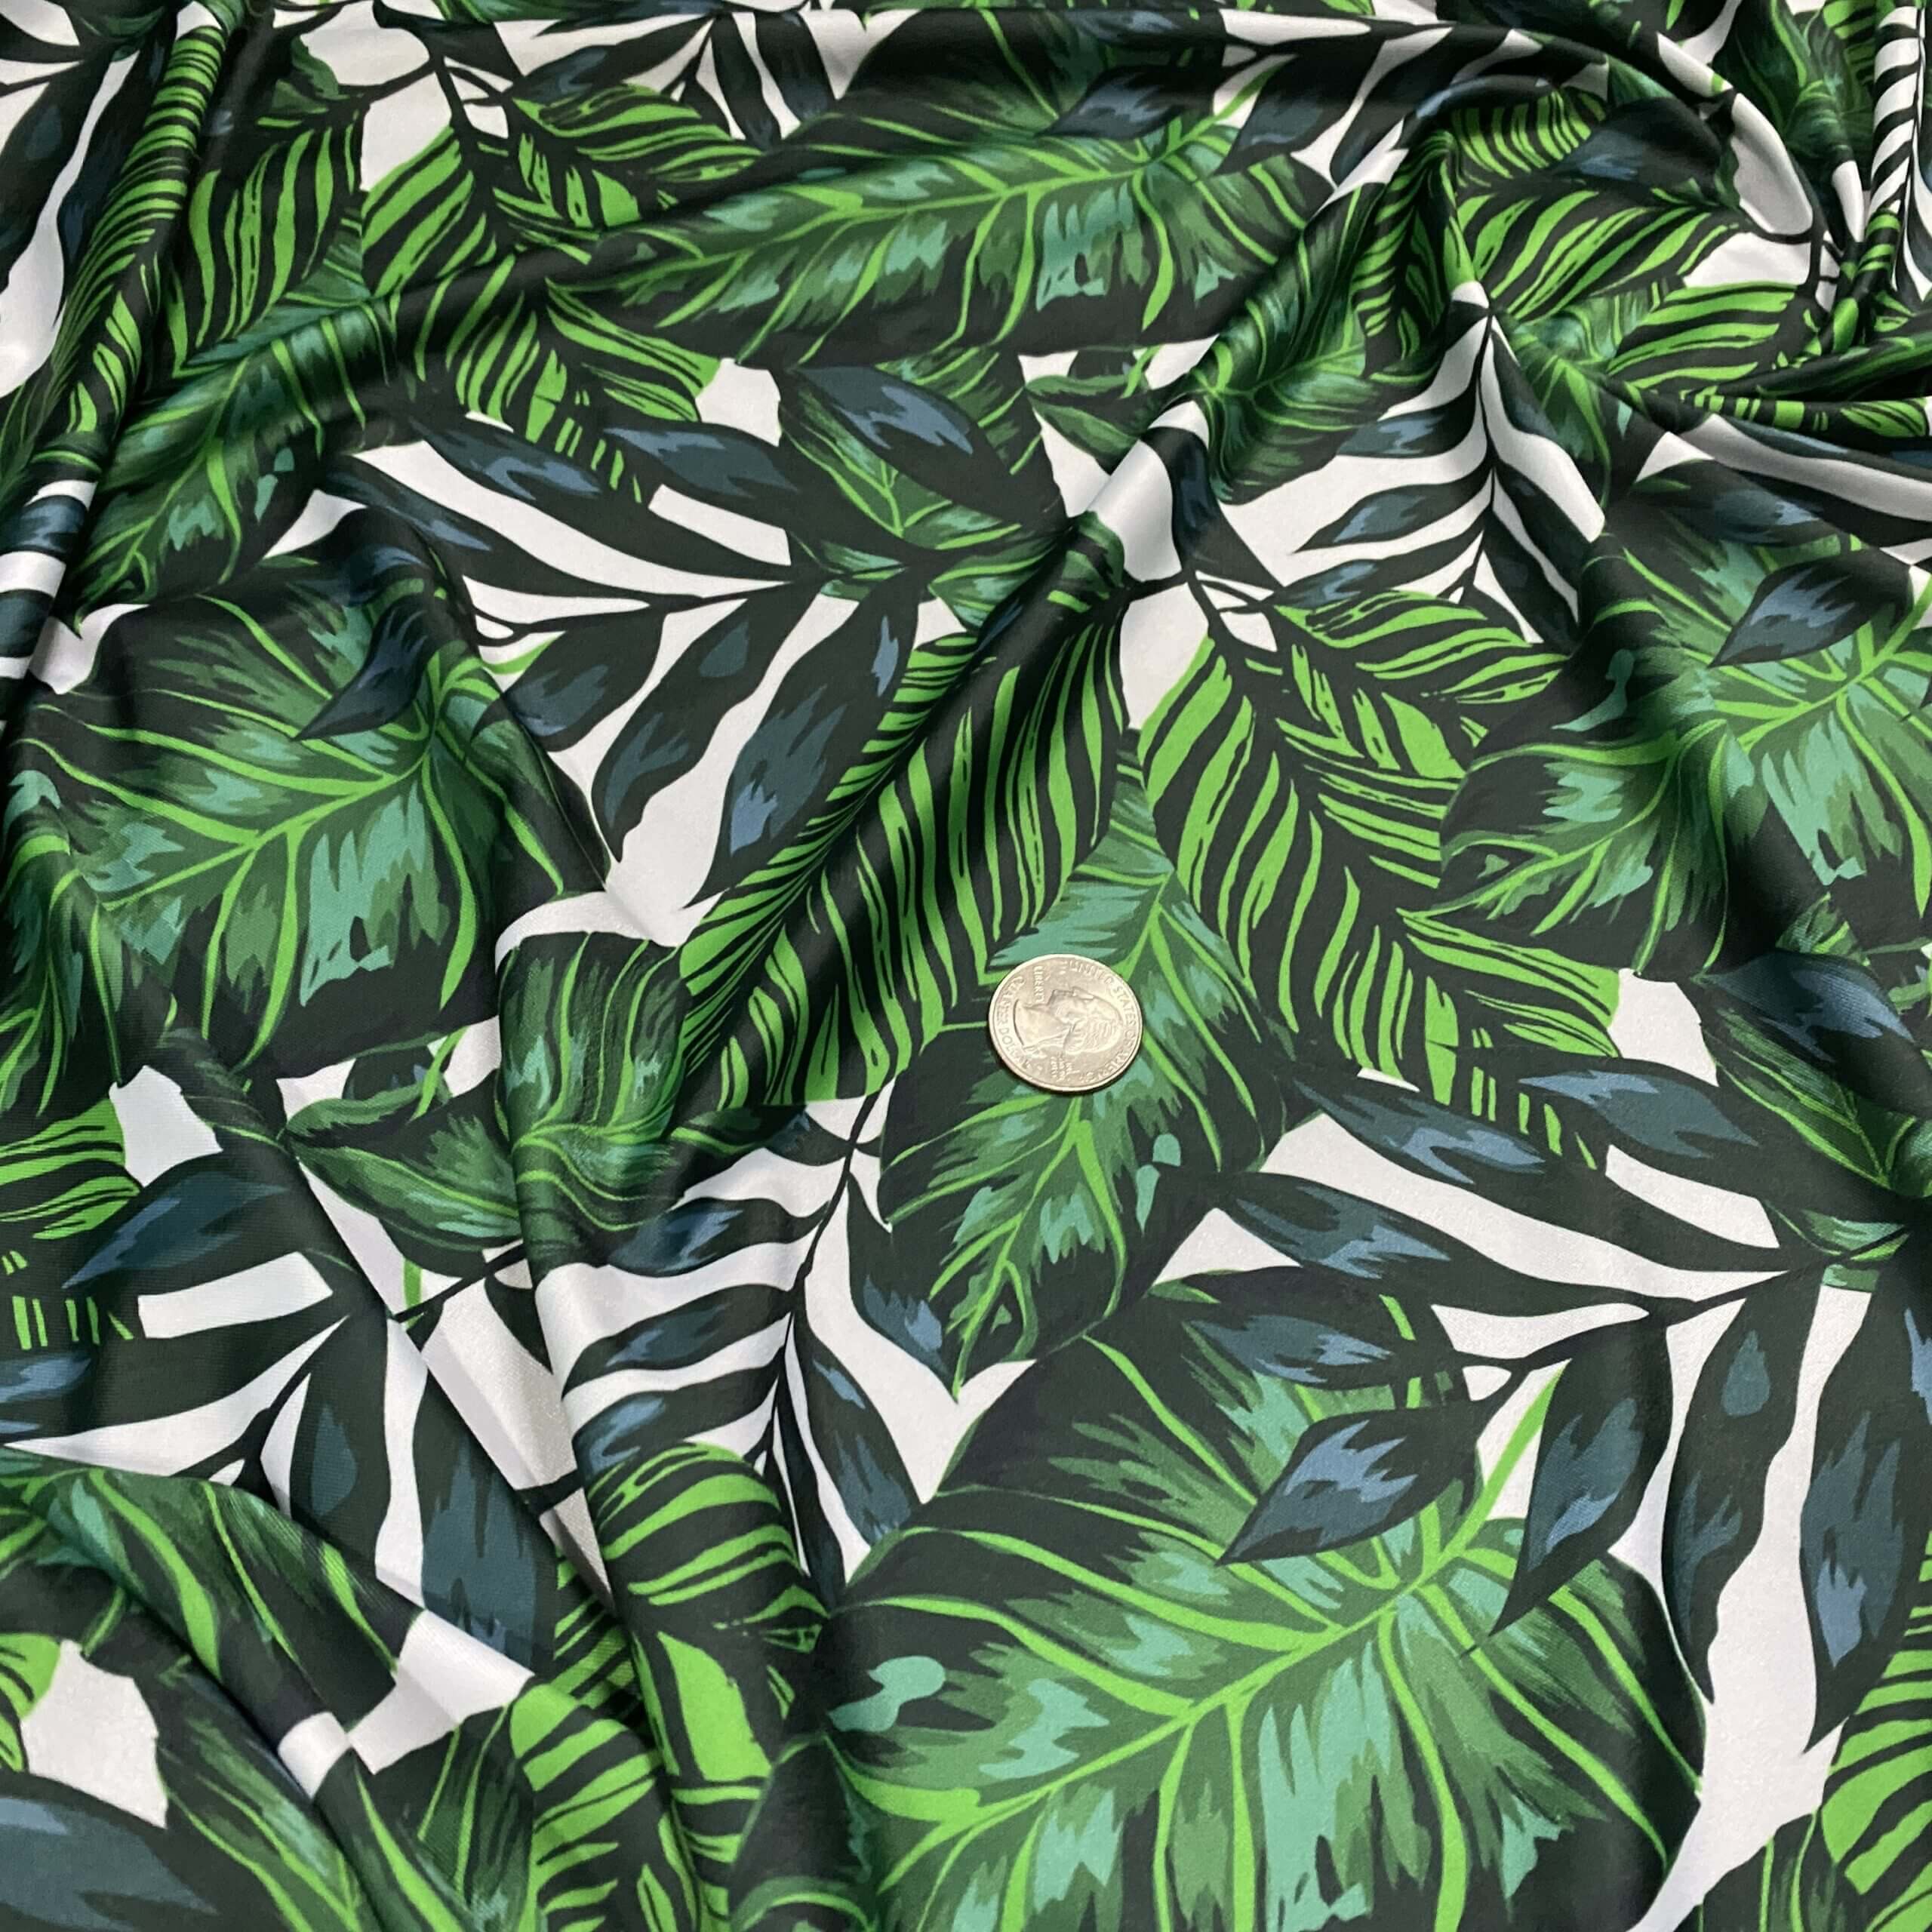 Shorts Swim Trunks Fabric Floral Print Perfect for Boardshorts ...